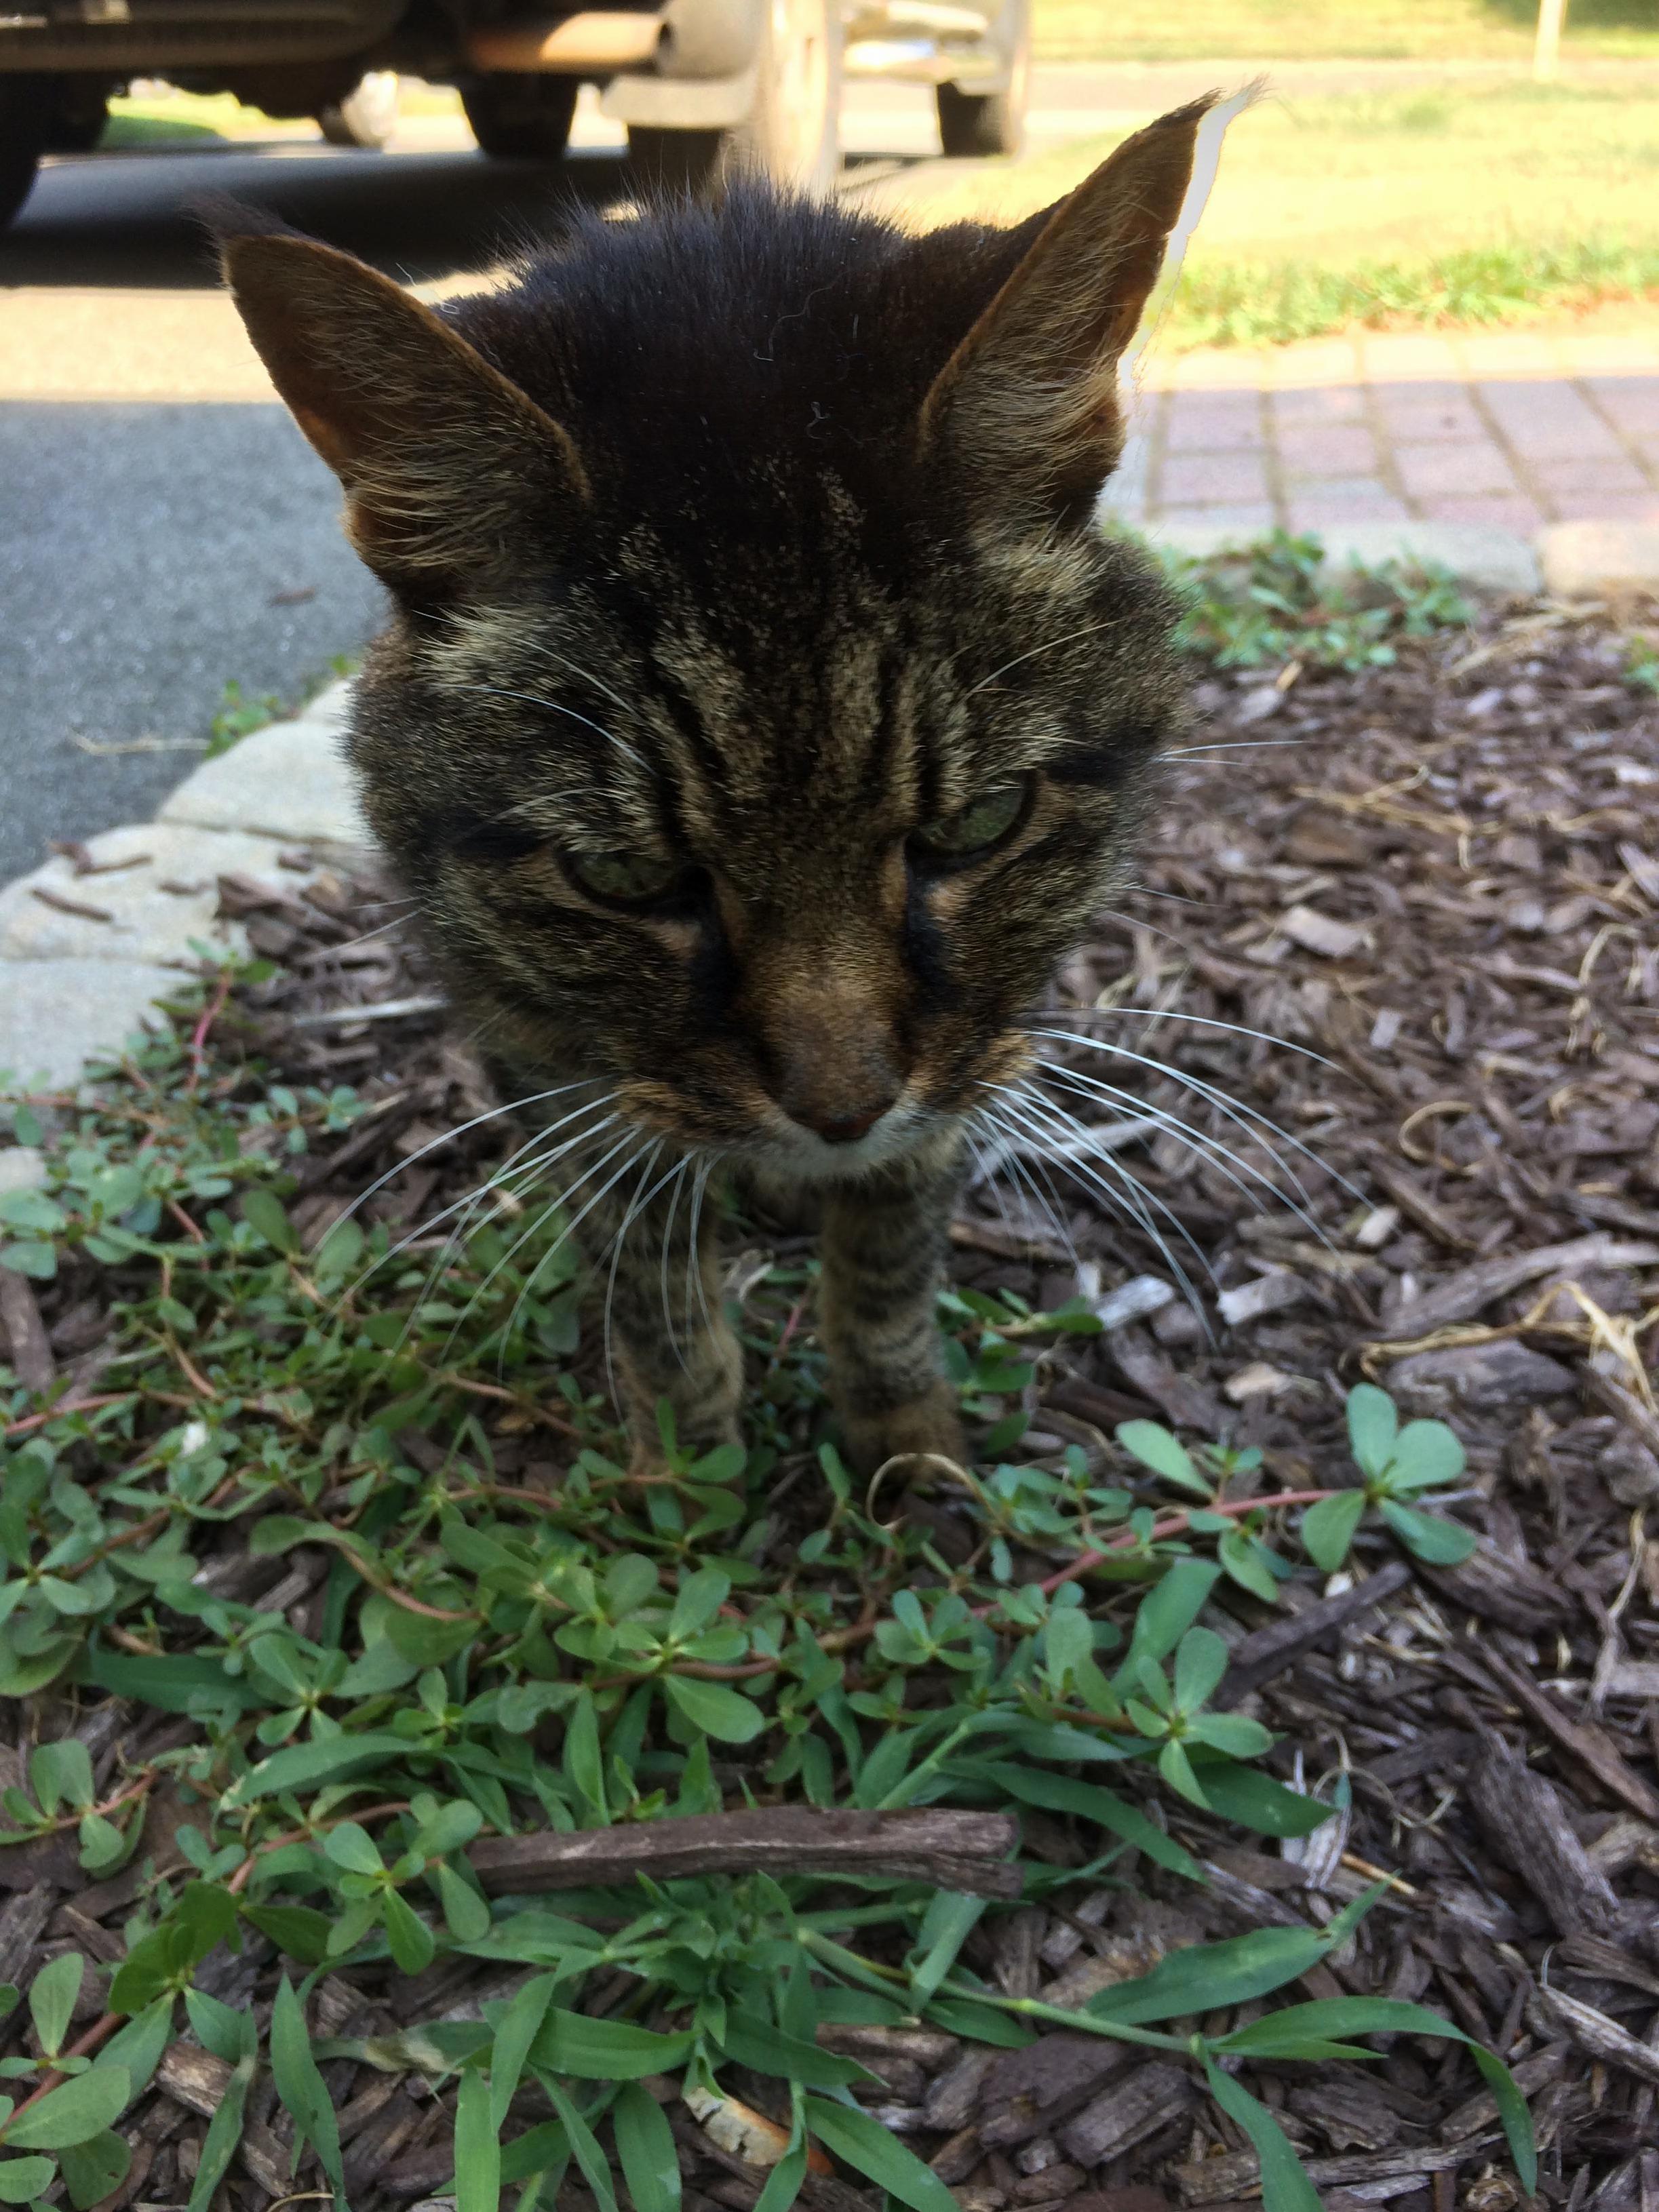 I asked gizmo the secret to living to 24 and he meowed loudly while digging at wood chips. can someone decipher its probably important…